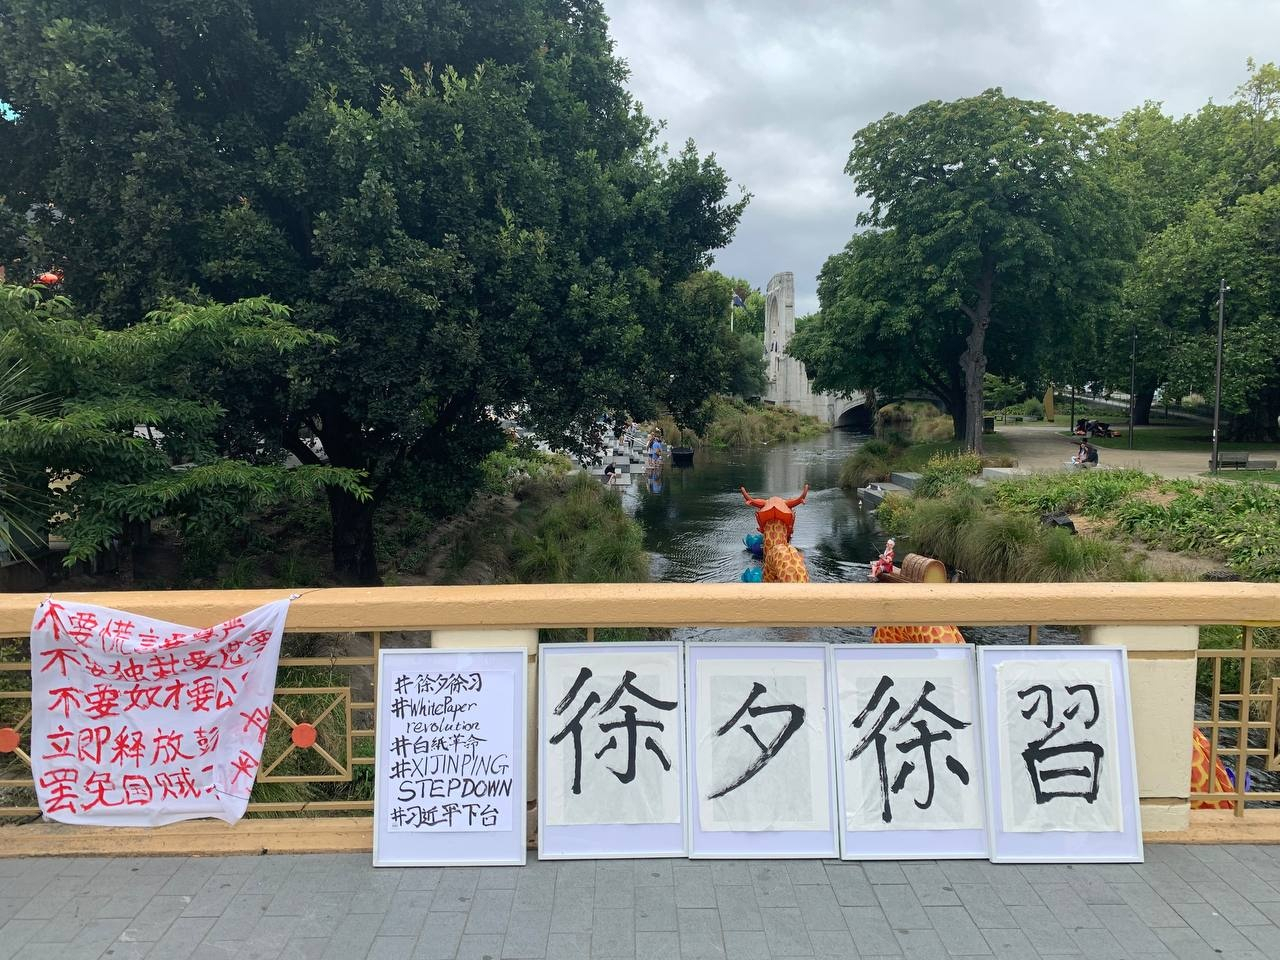 Signs that read “Xi Jinping step down” are posted at the white-paper protest site in Christchurch, New Zealand, on Saturday. (courtesy of reader)